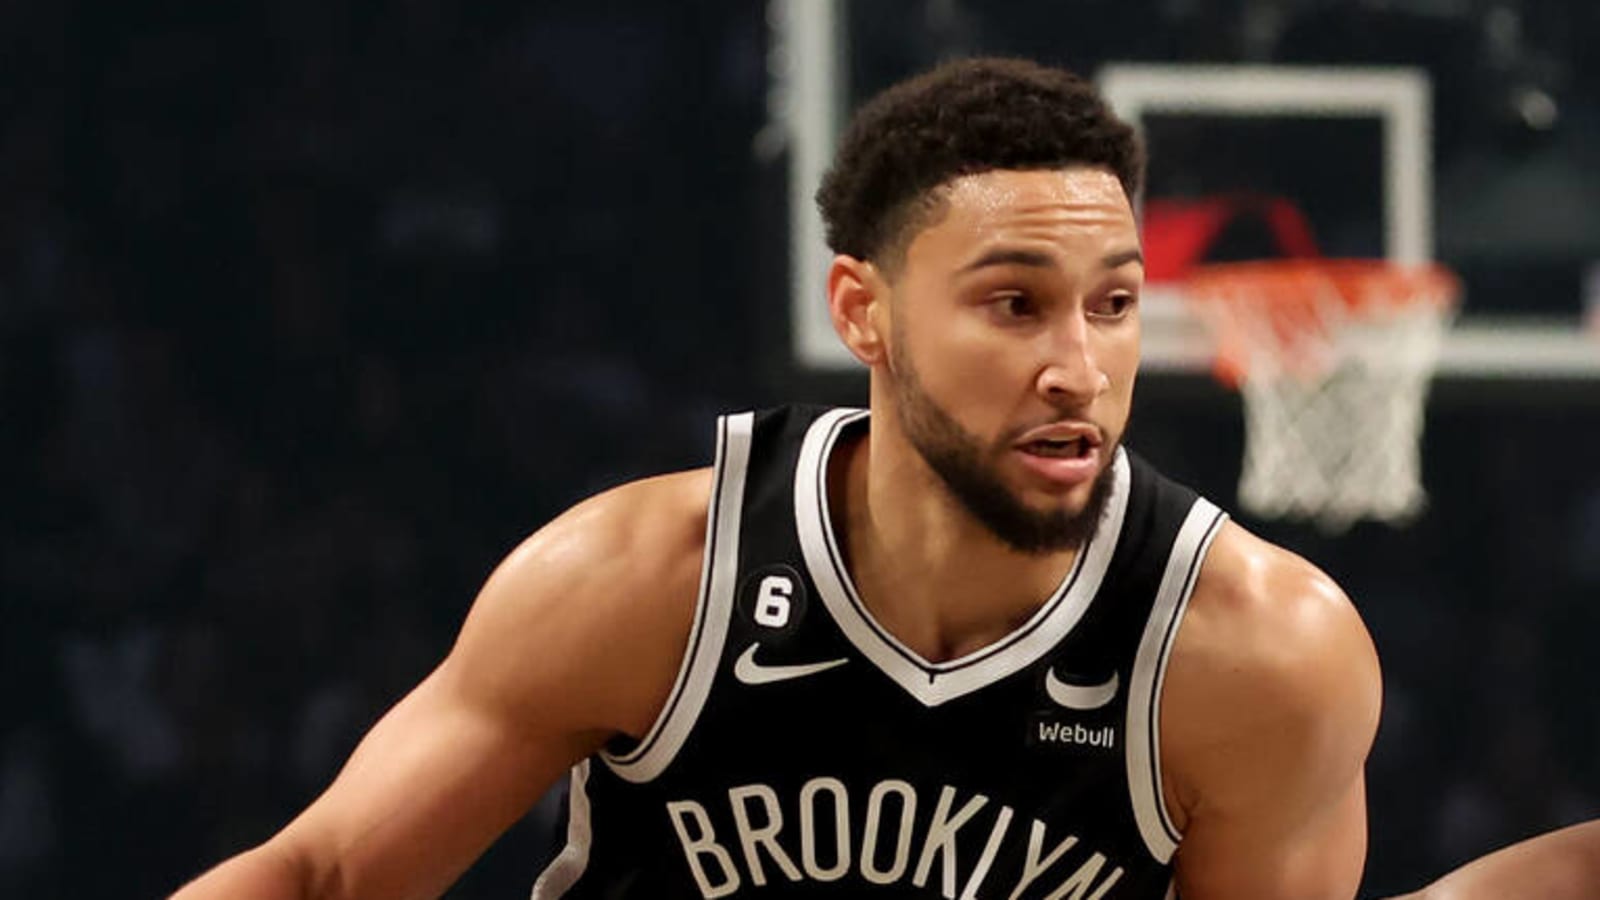 Ben Simmons scores first points as a Net in loss to Pels